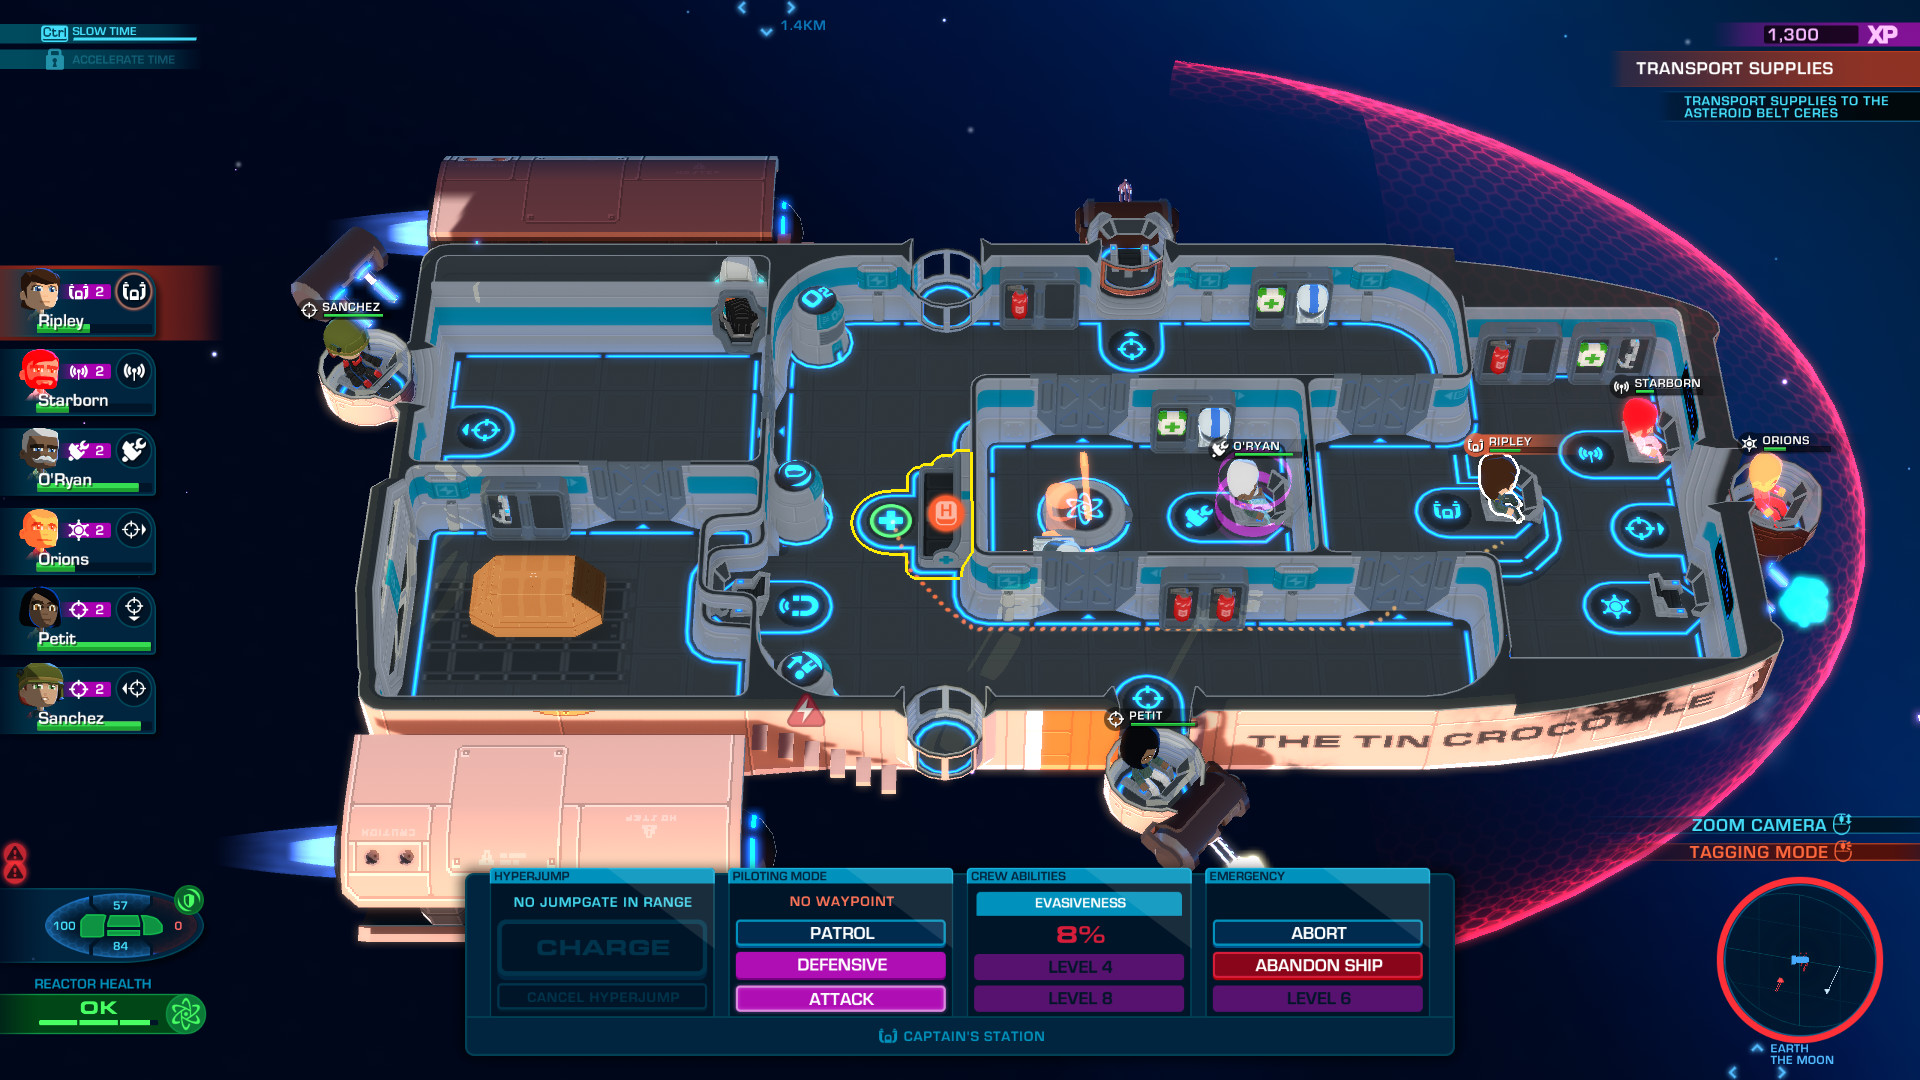  Cartoon spaceship disaster sim Space Crew is free to keep on Steam for a limited time 